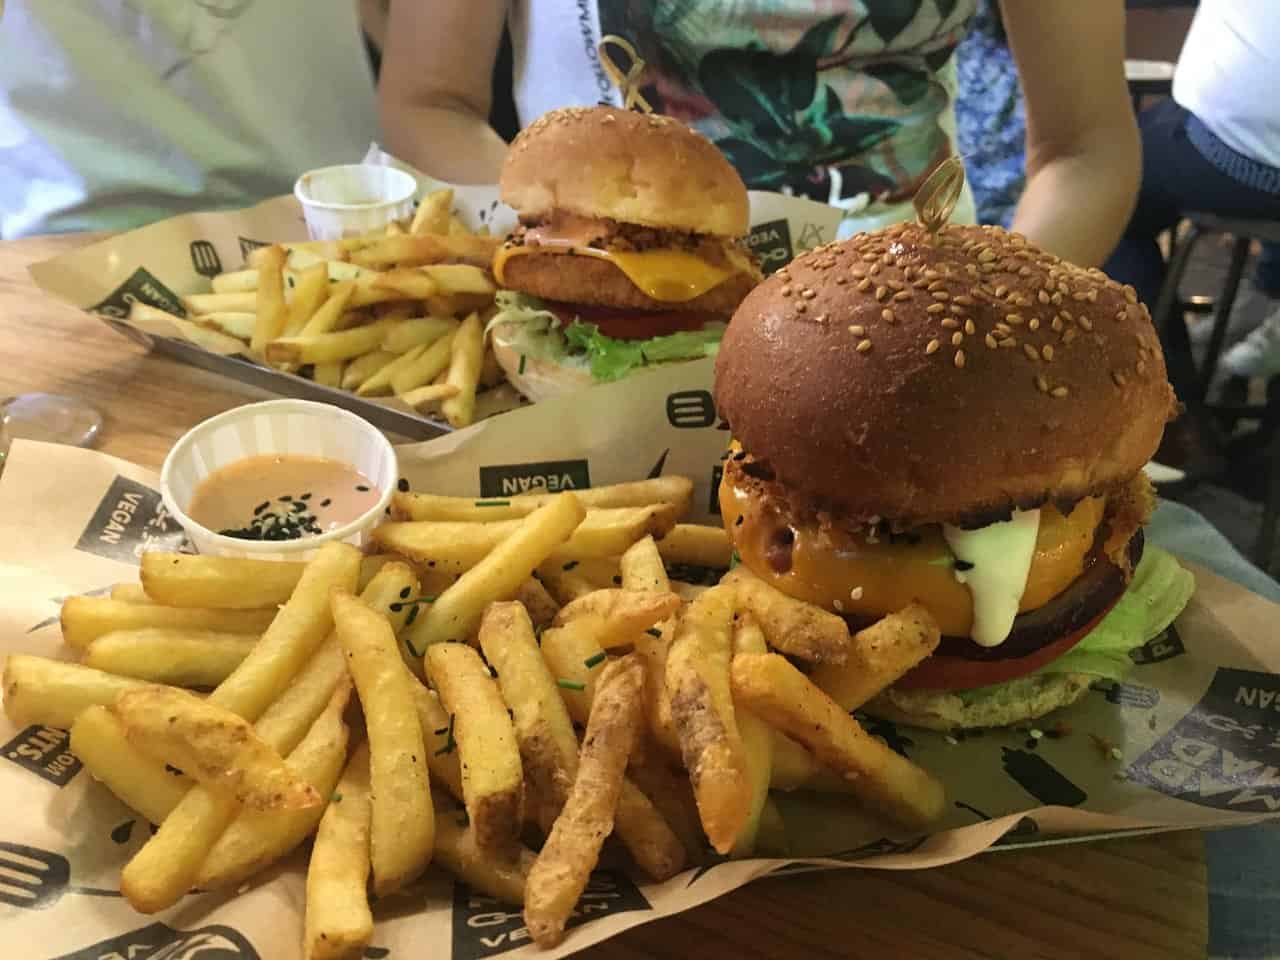 Mad Mad Vegan arrives in Barcelona with its famous vegan burgers